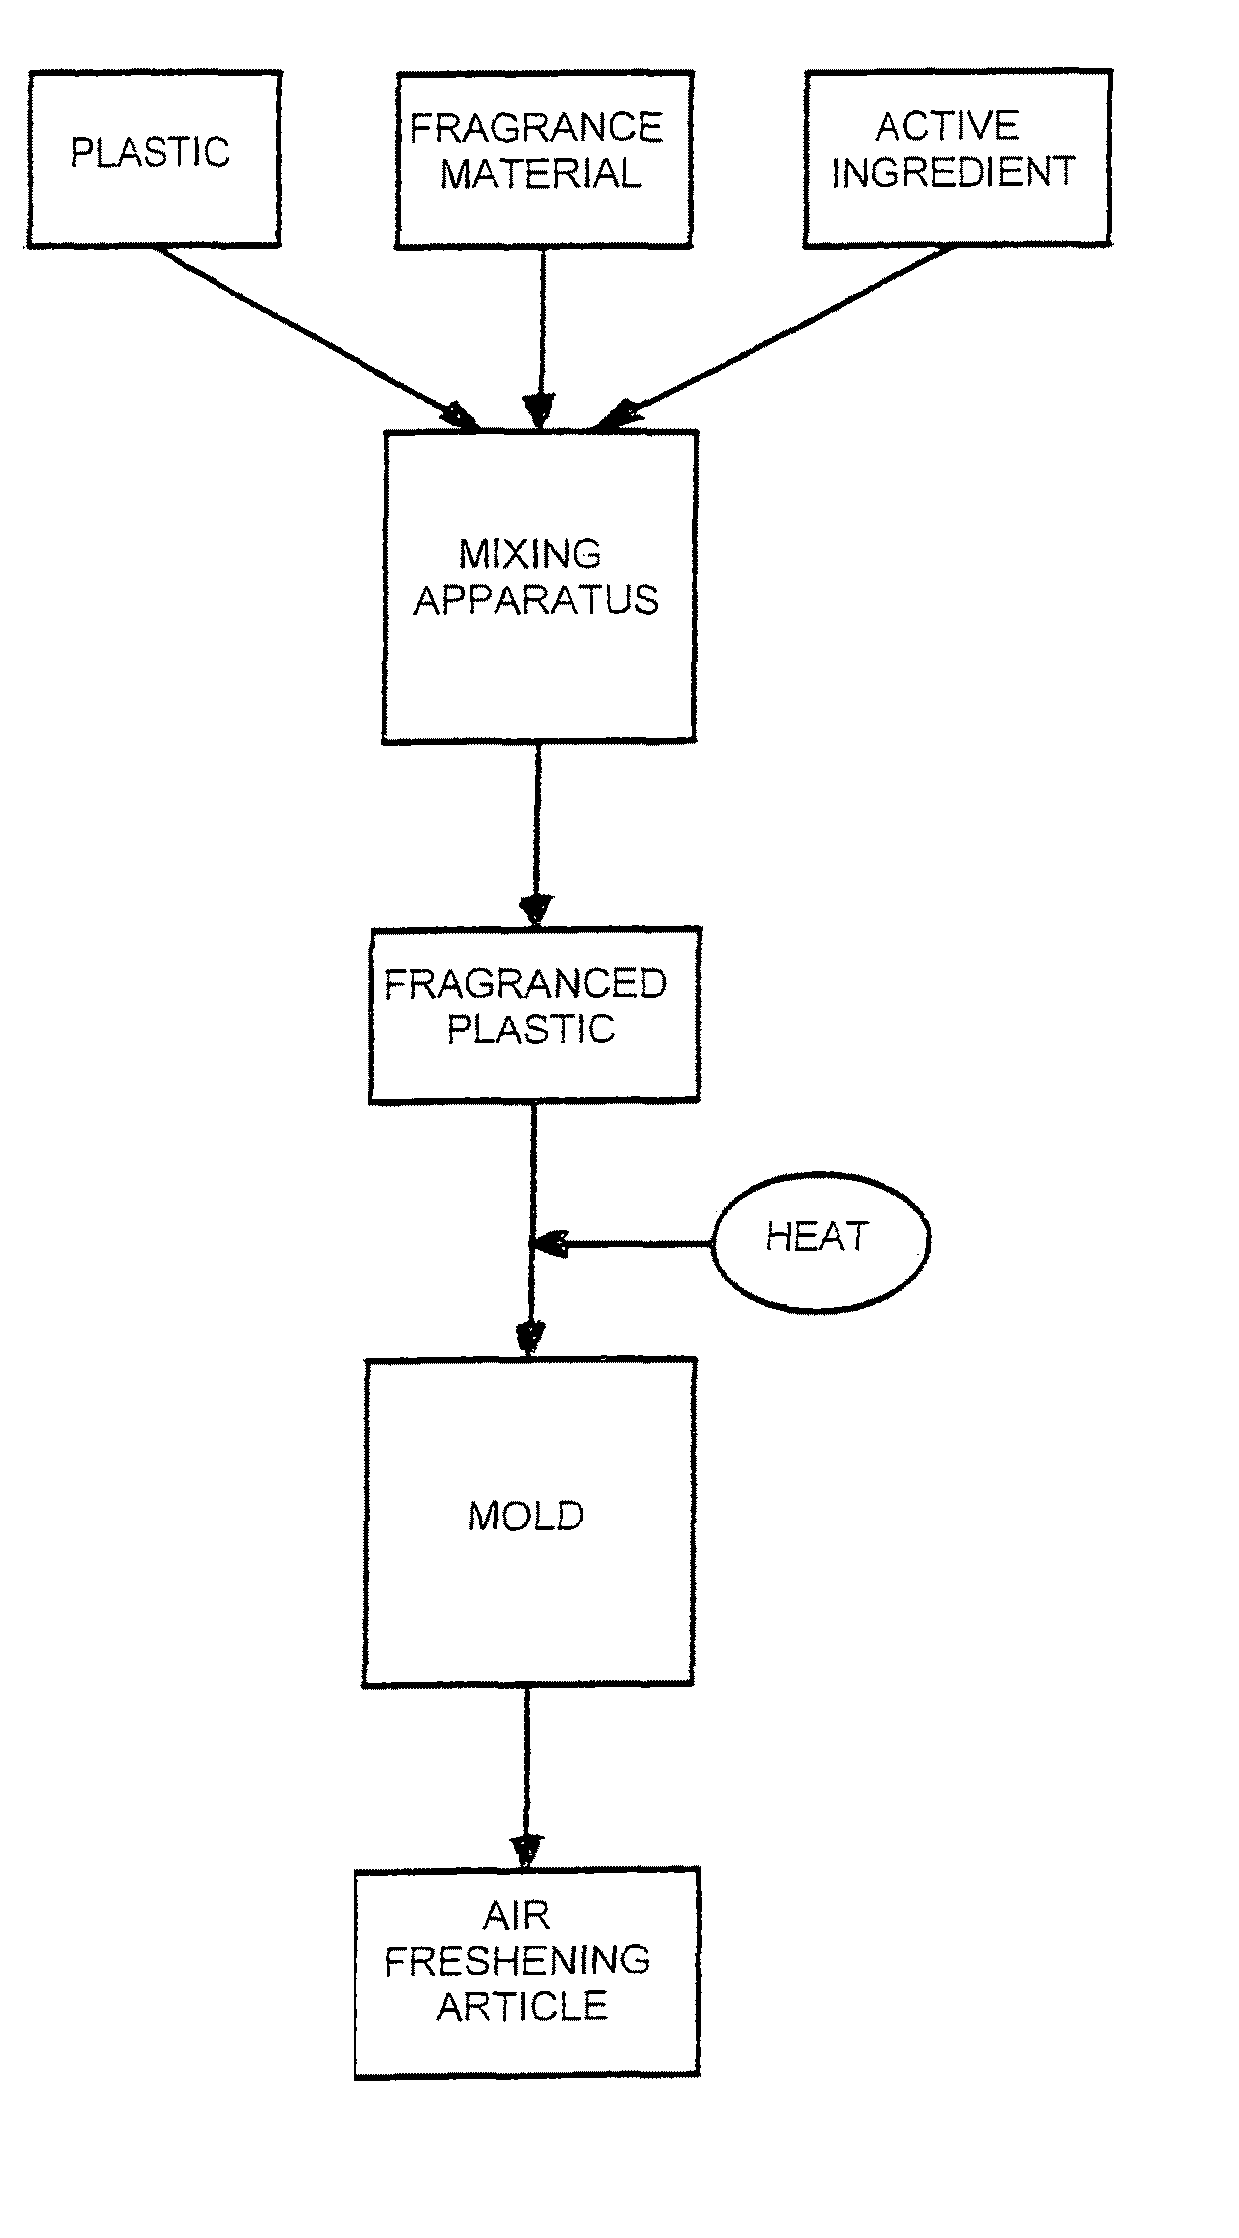 Method of manufacture air freshening article